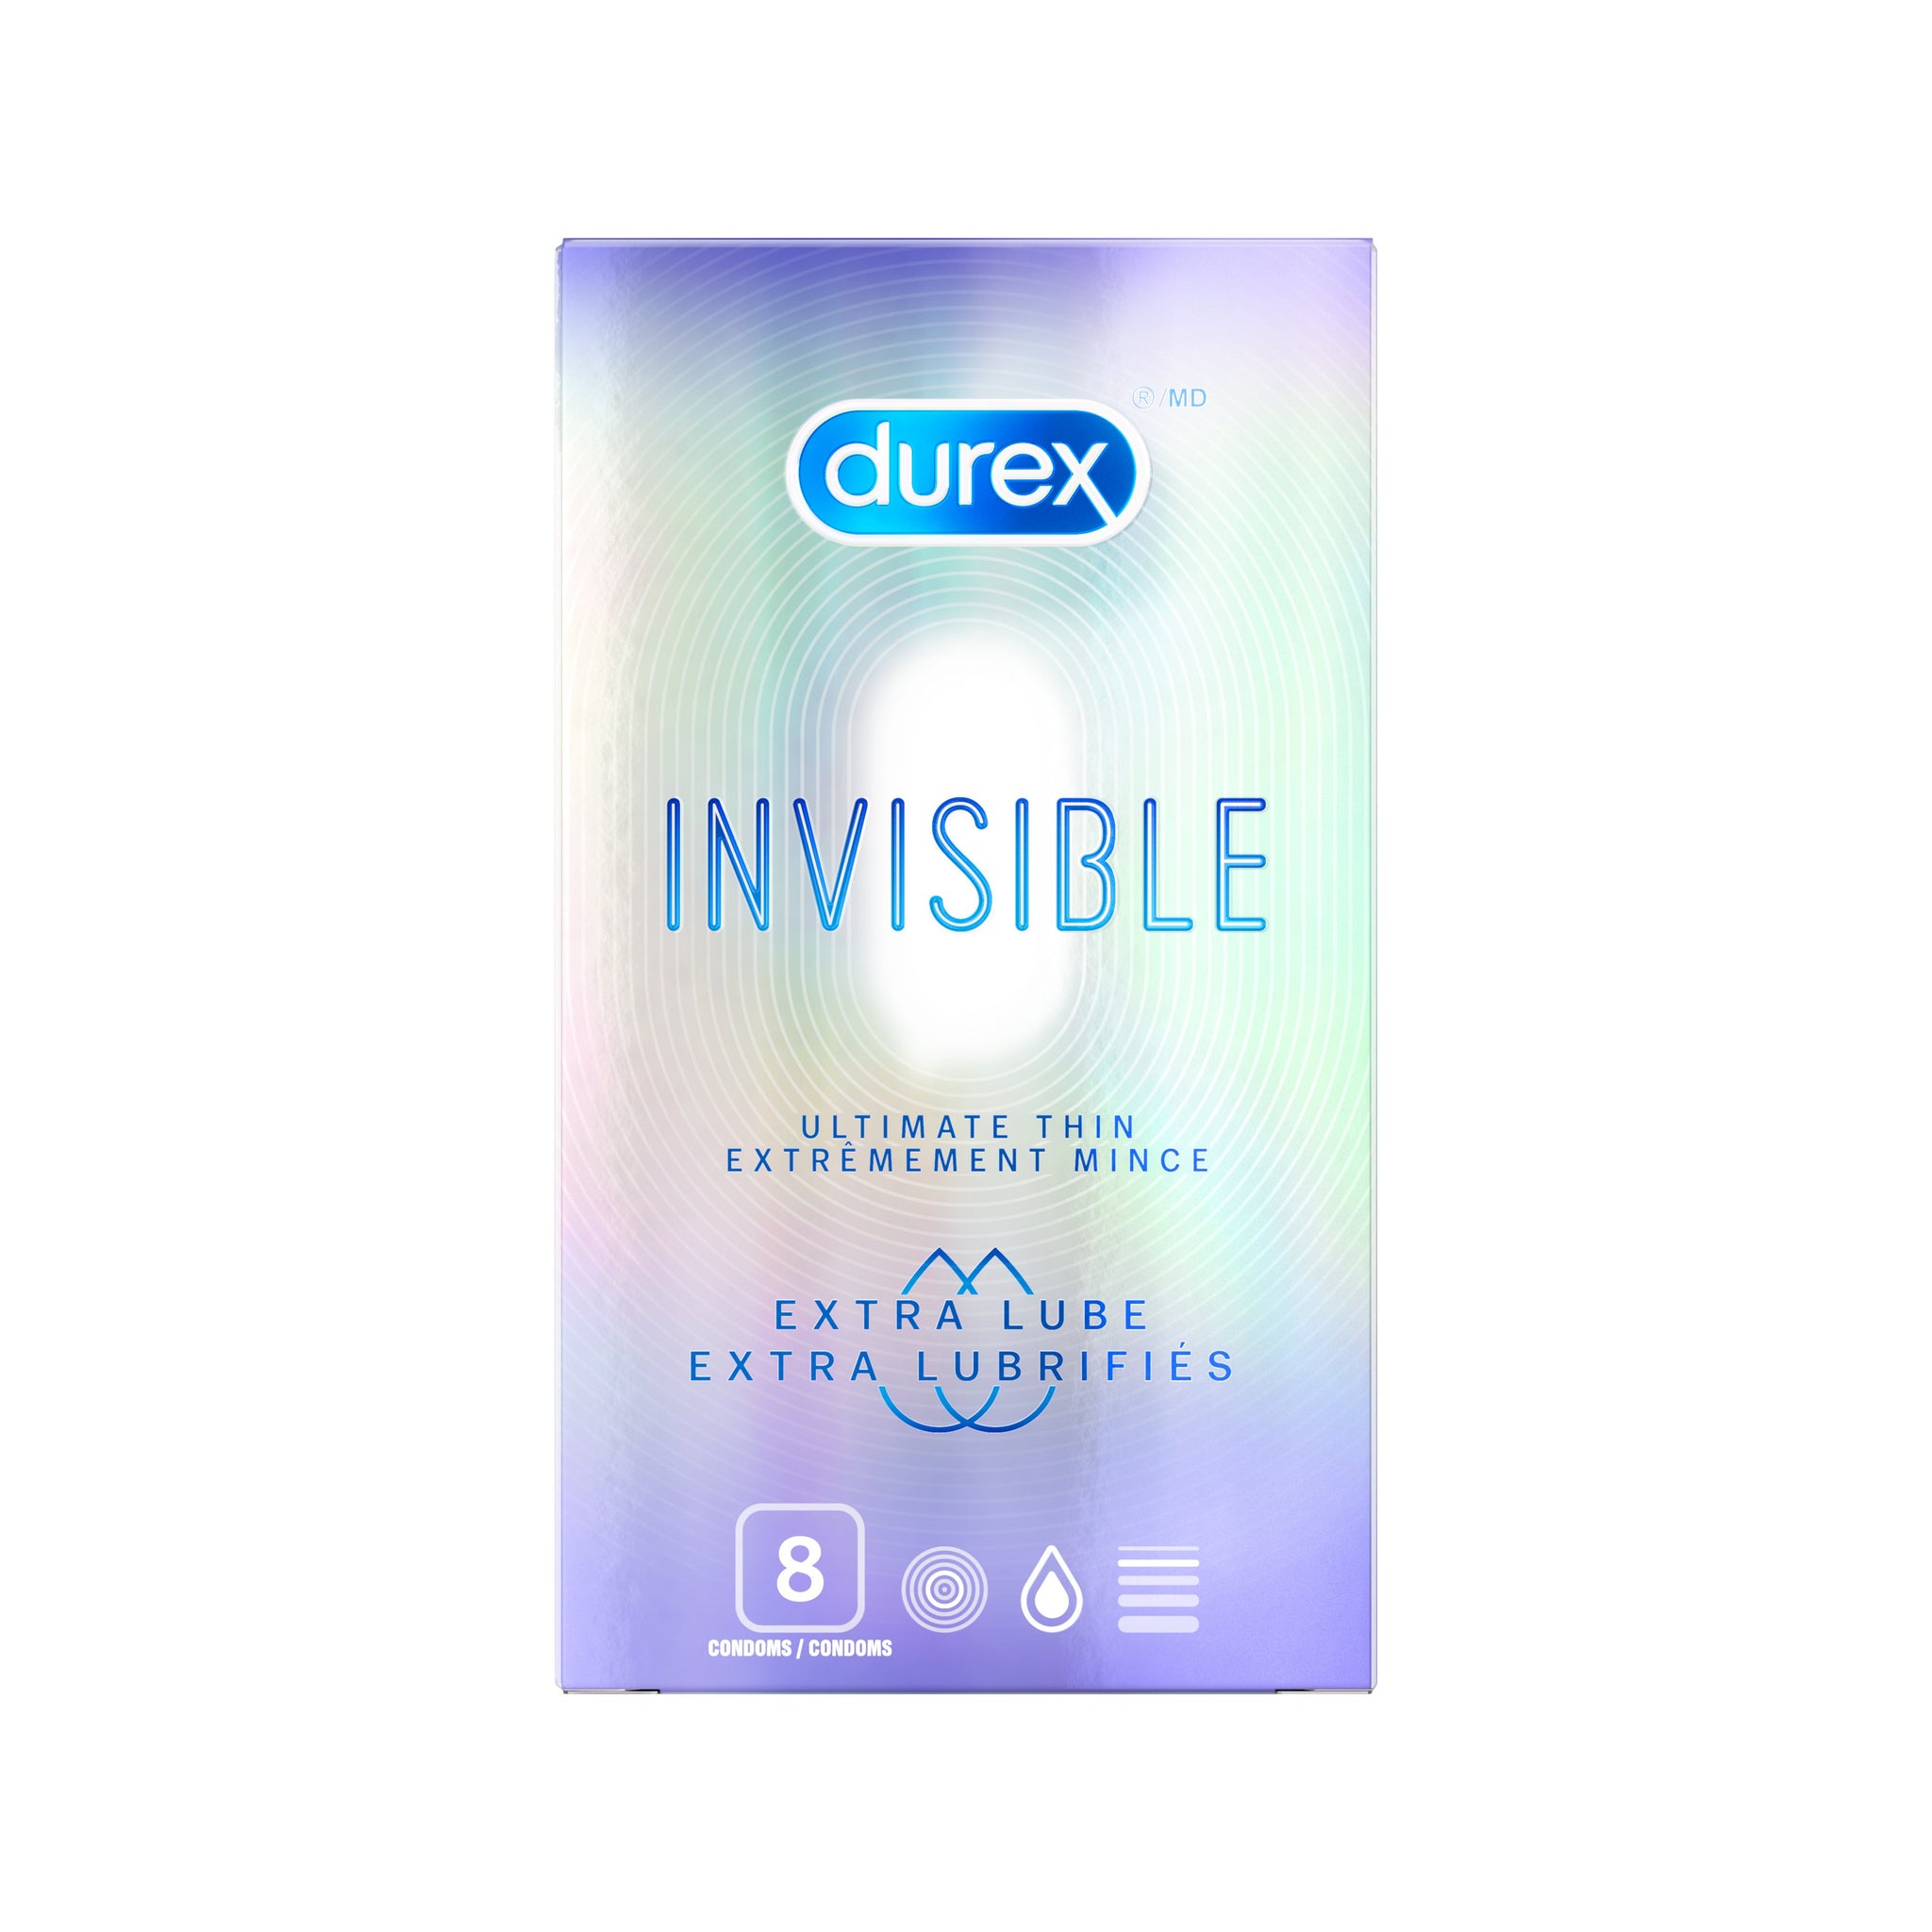 packshot of Durex Invisible Ultimate Thin Condoms, Extra Lubricated, 8 pack